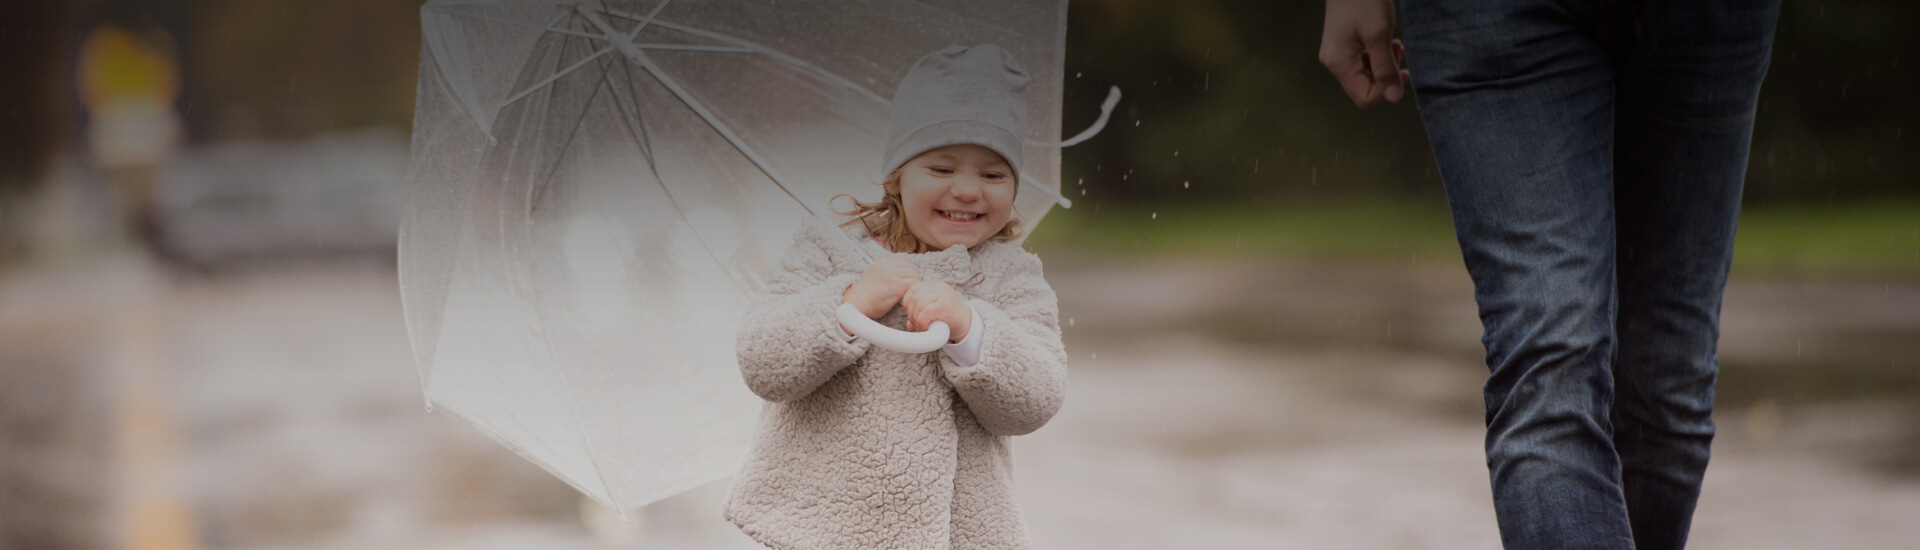 Photo of a baby smiling with her umbrella